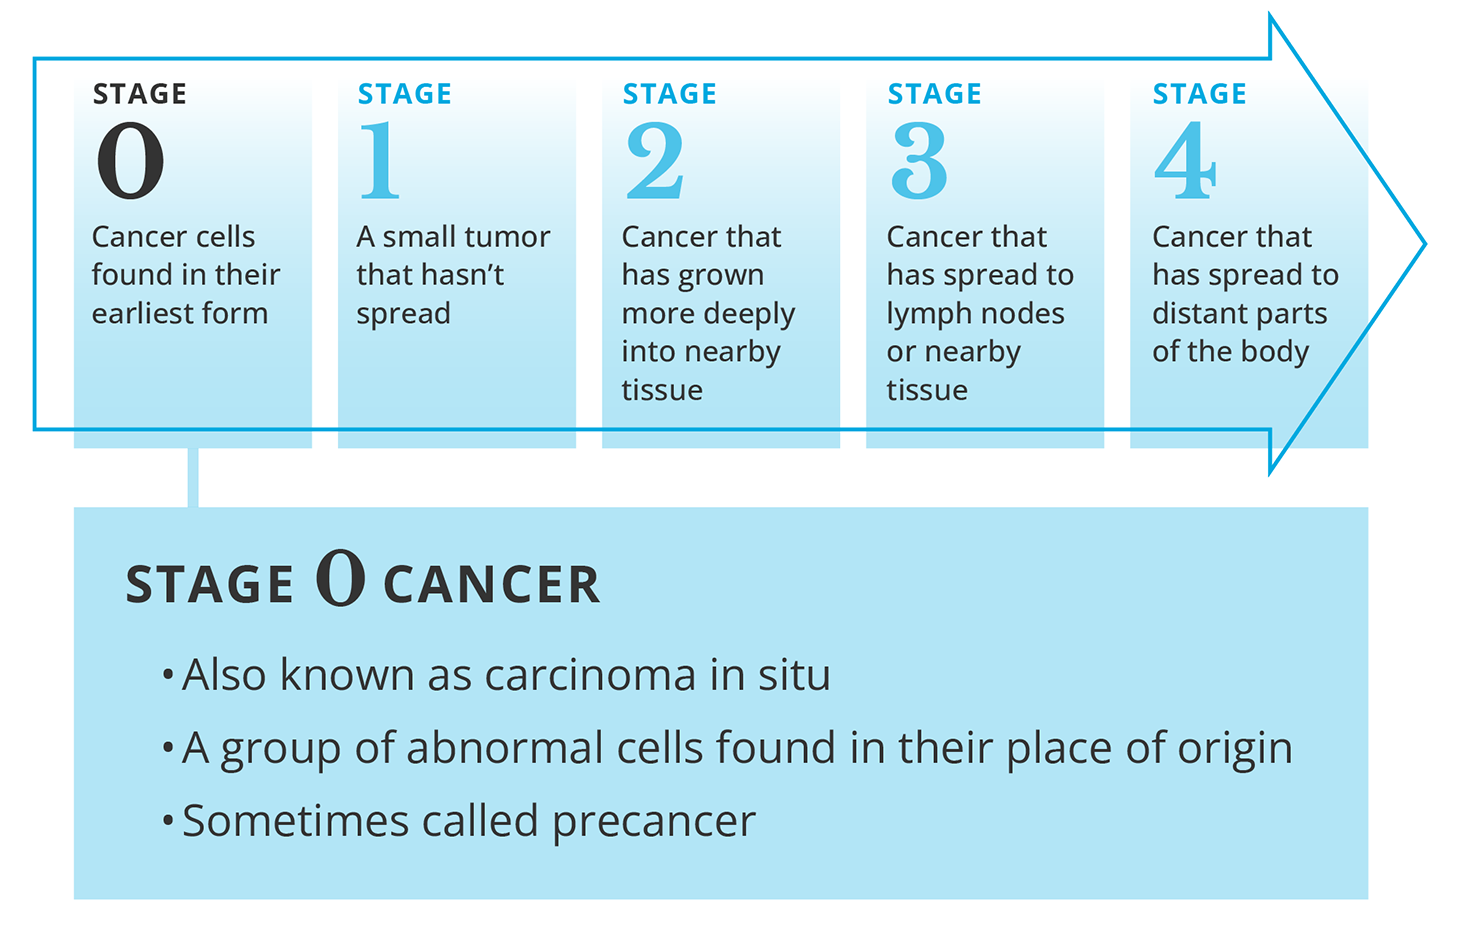 Description of stage 0 cancer, also known as carcinoma in situ